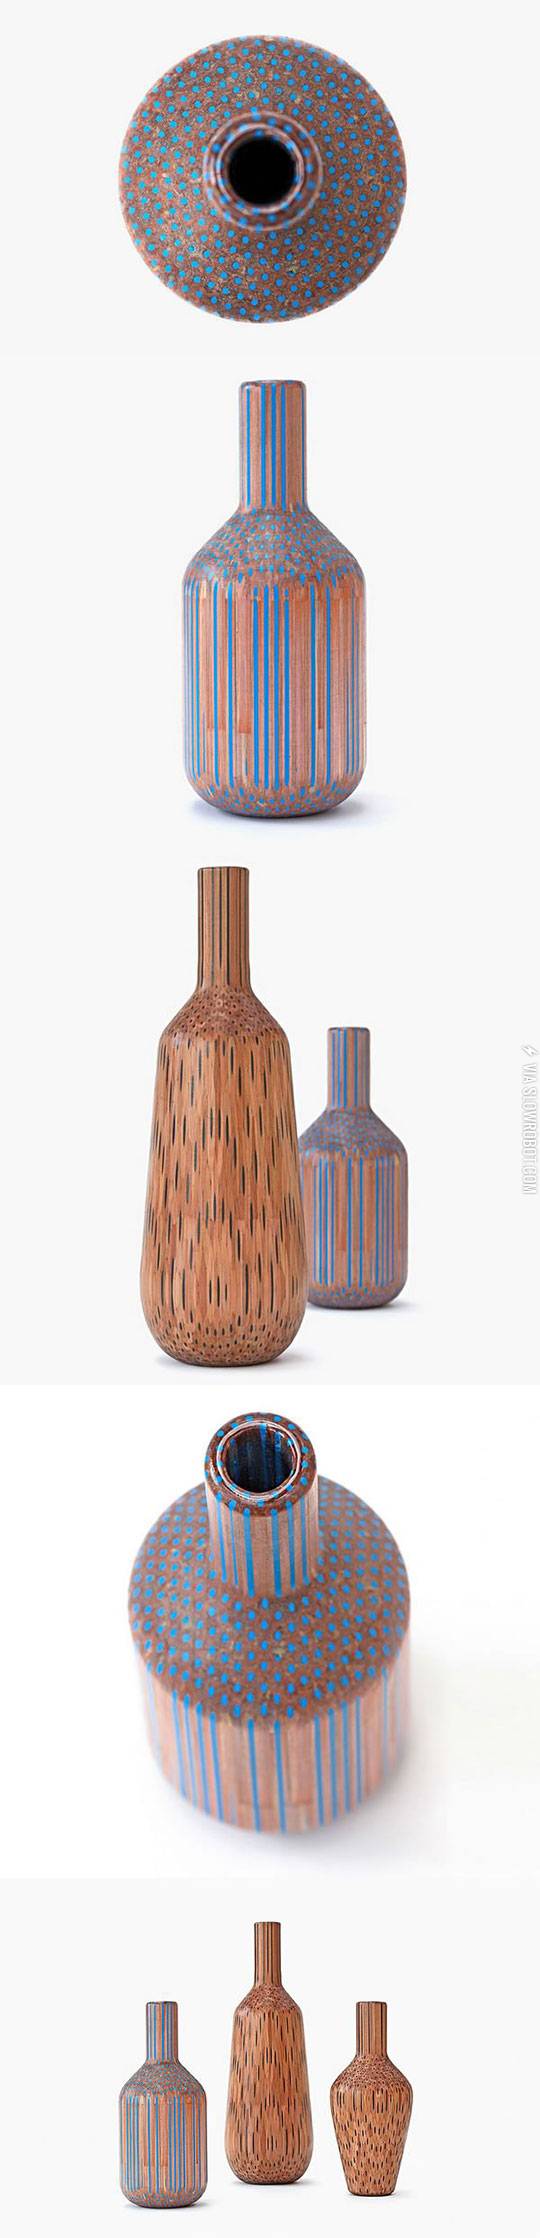 These+vases+are+made+from+pencils+glued+together.